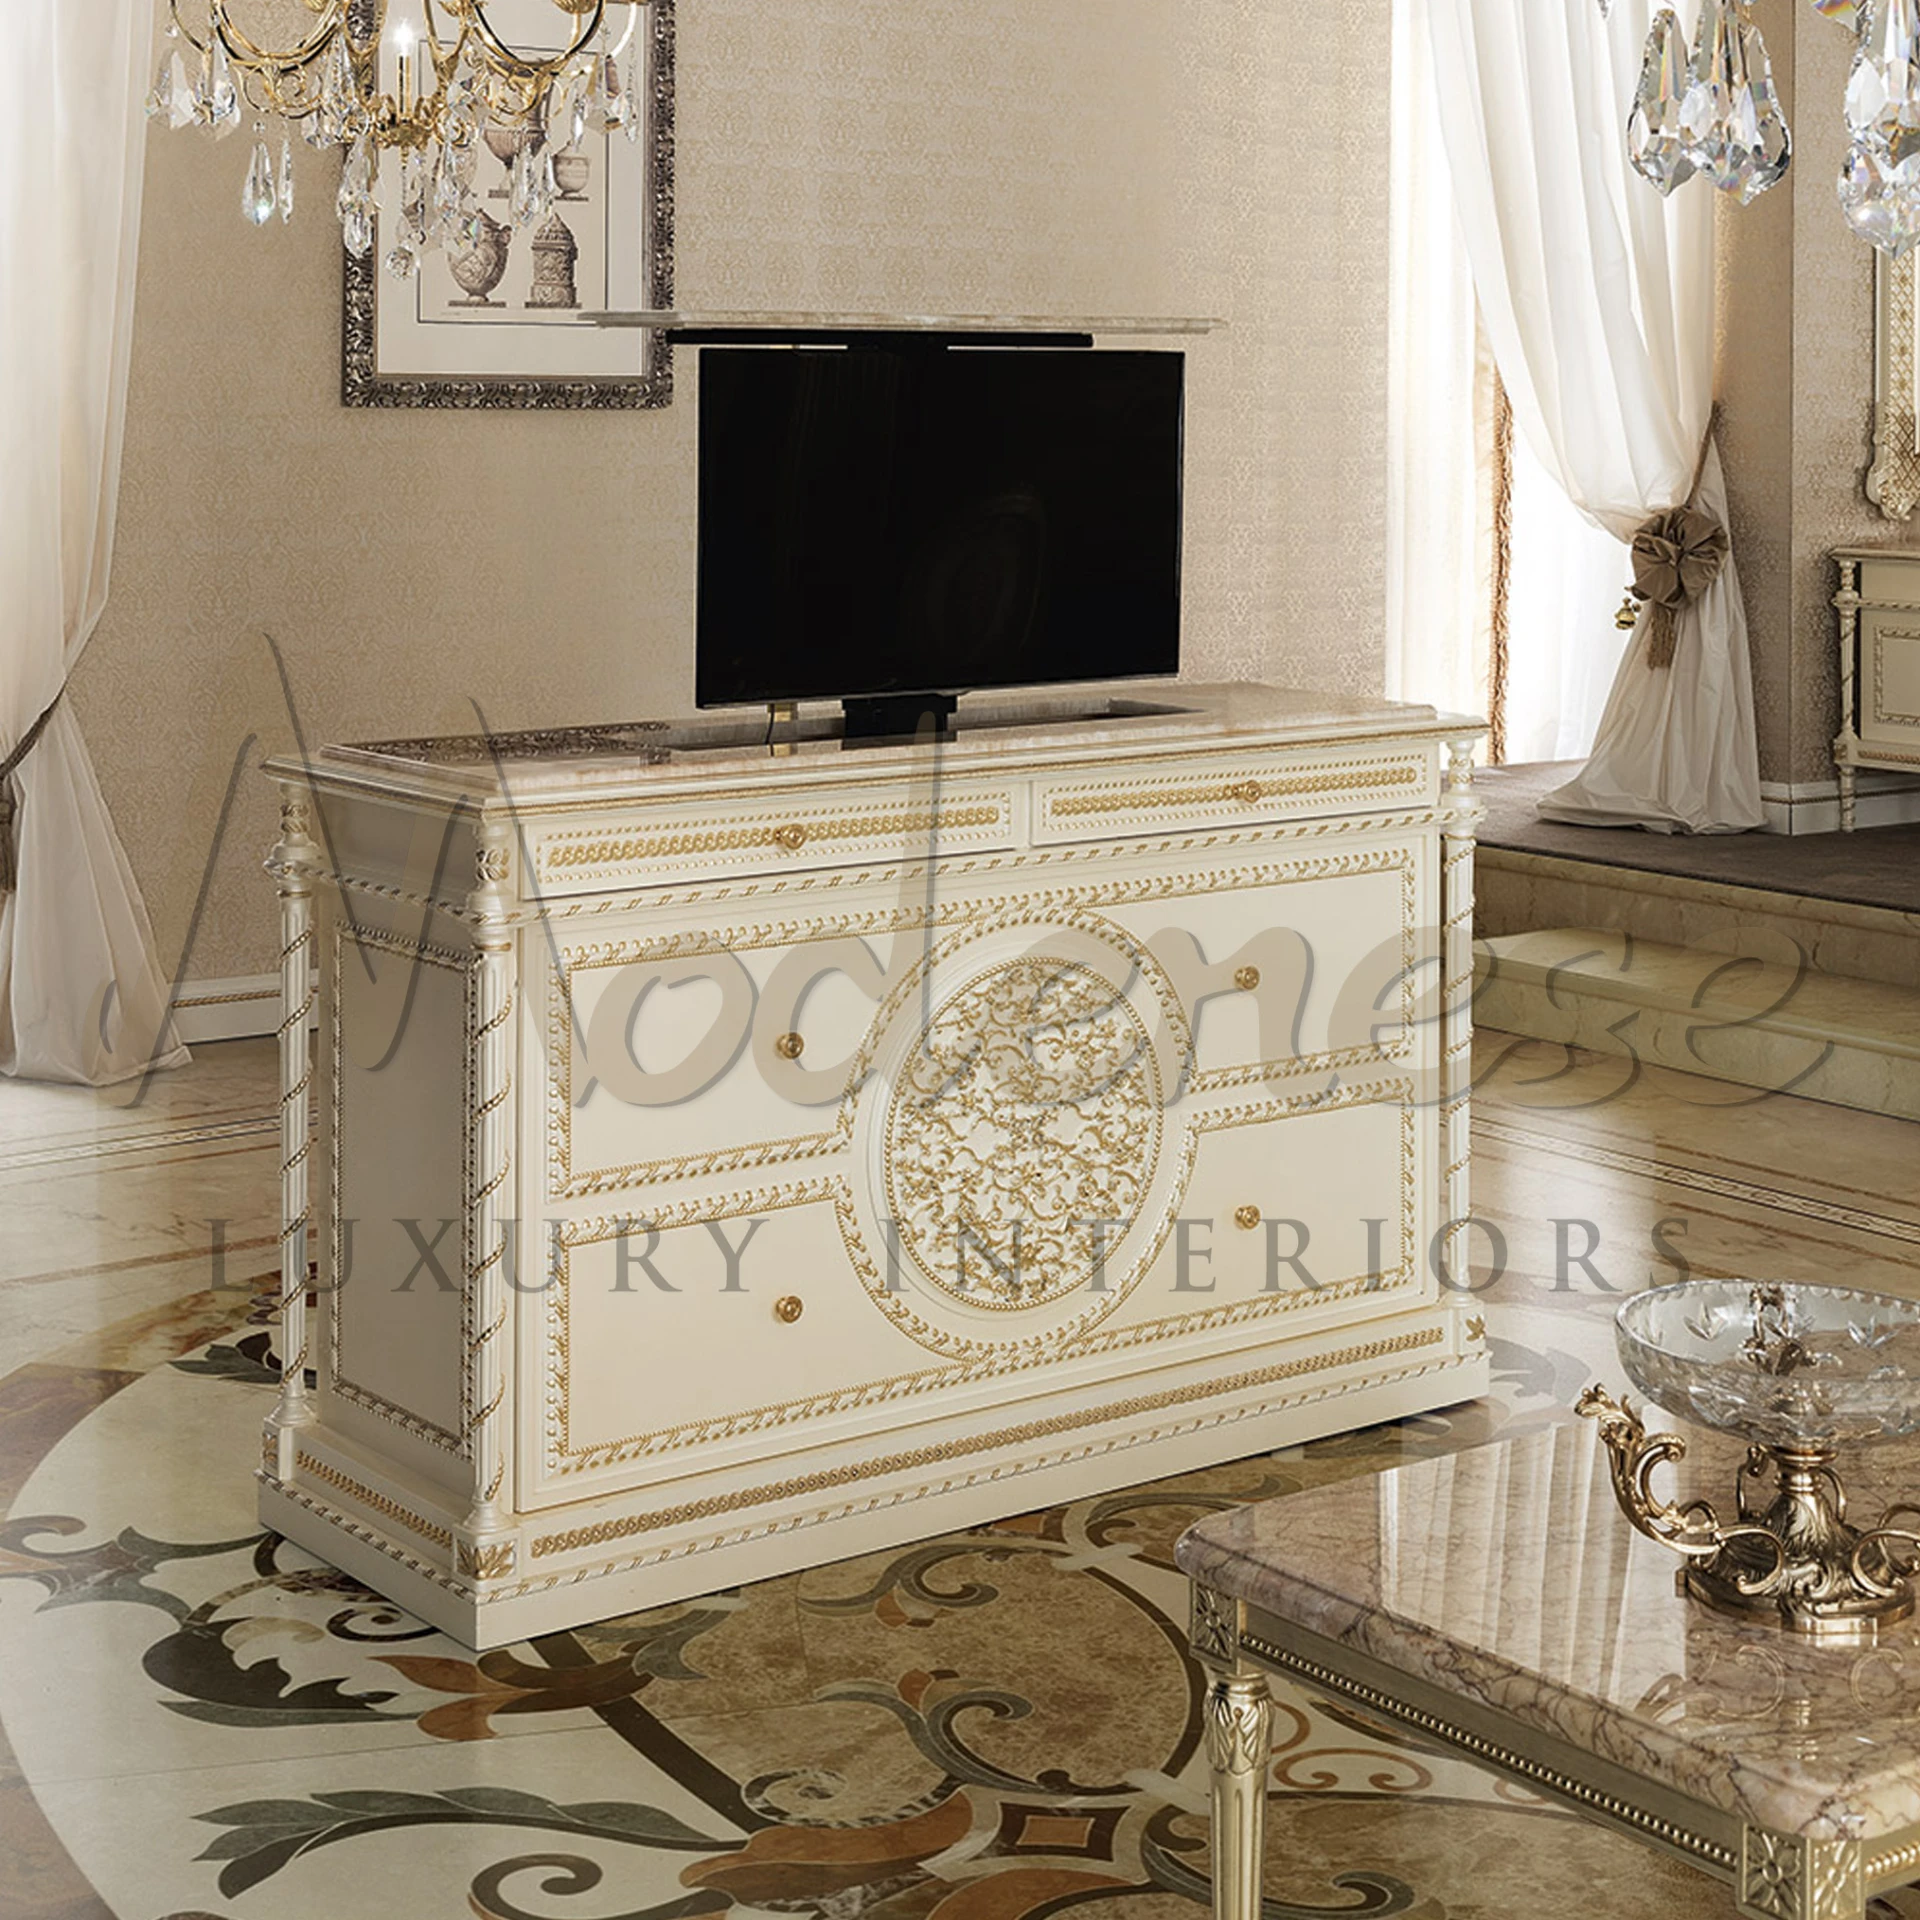 Innovative Central TV Stand with mechanism, part of a classic furniture collection, designed by Italian artisans for bespoke interiors.
